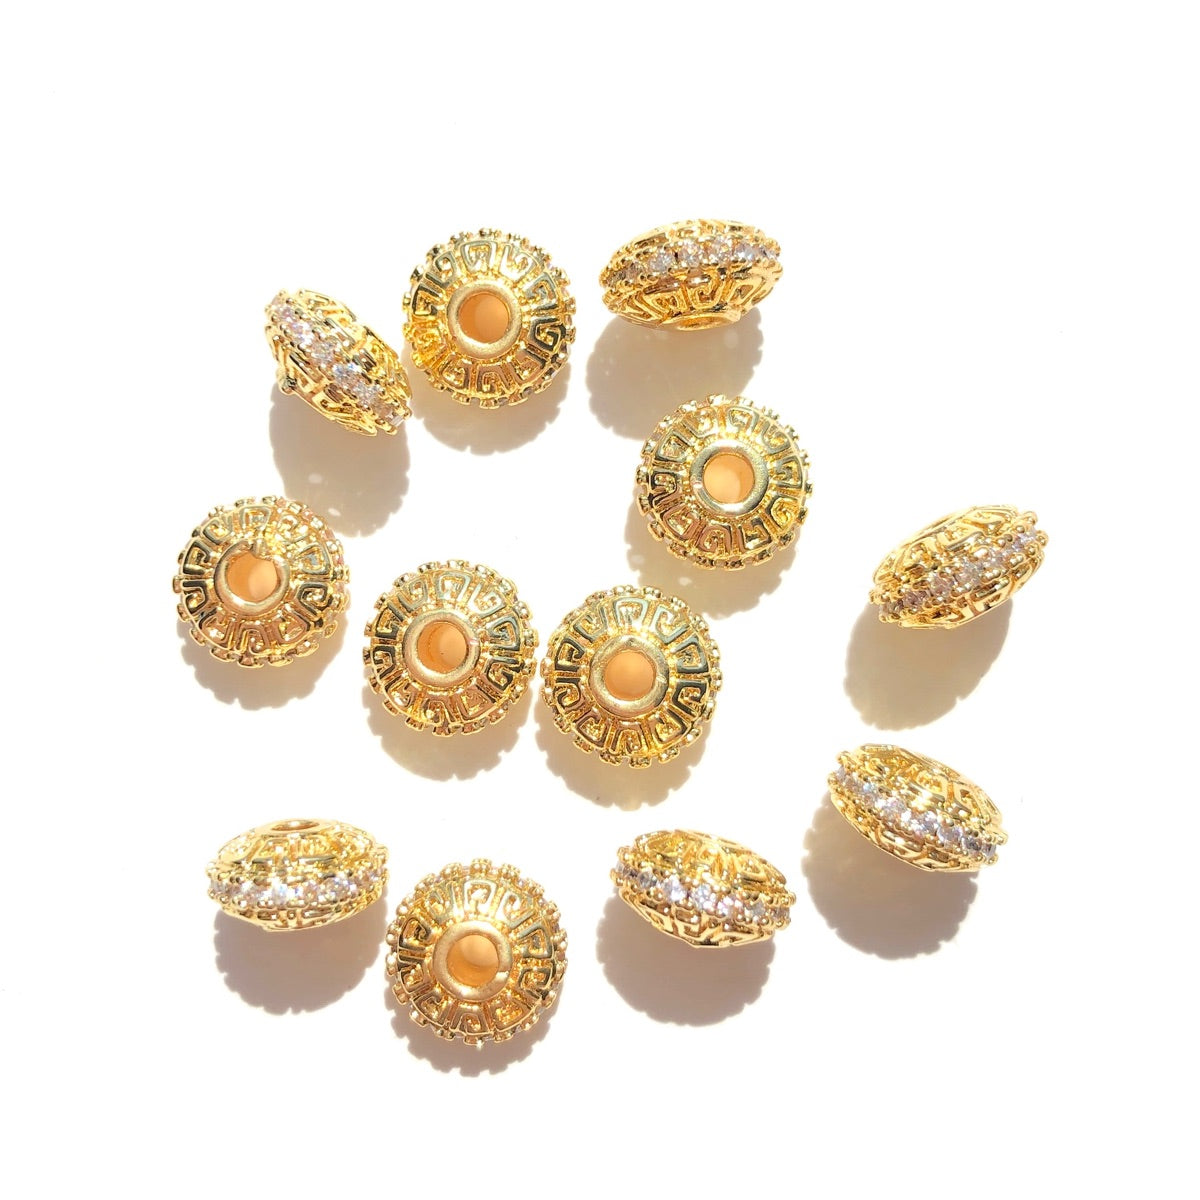 20-50pcs/lot 7.7mm CZ Paved Rondelle Wheel Spacers Gold CZ Paved Spacers New Spacers Arrivals Rondelle Beads Wholesale Charms Beads Beyond